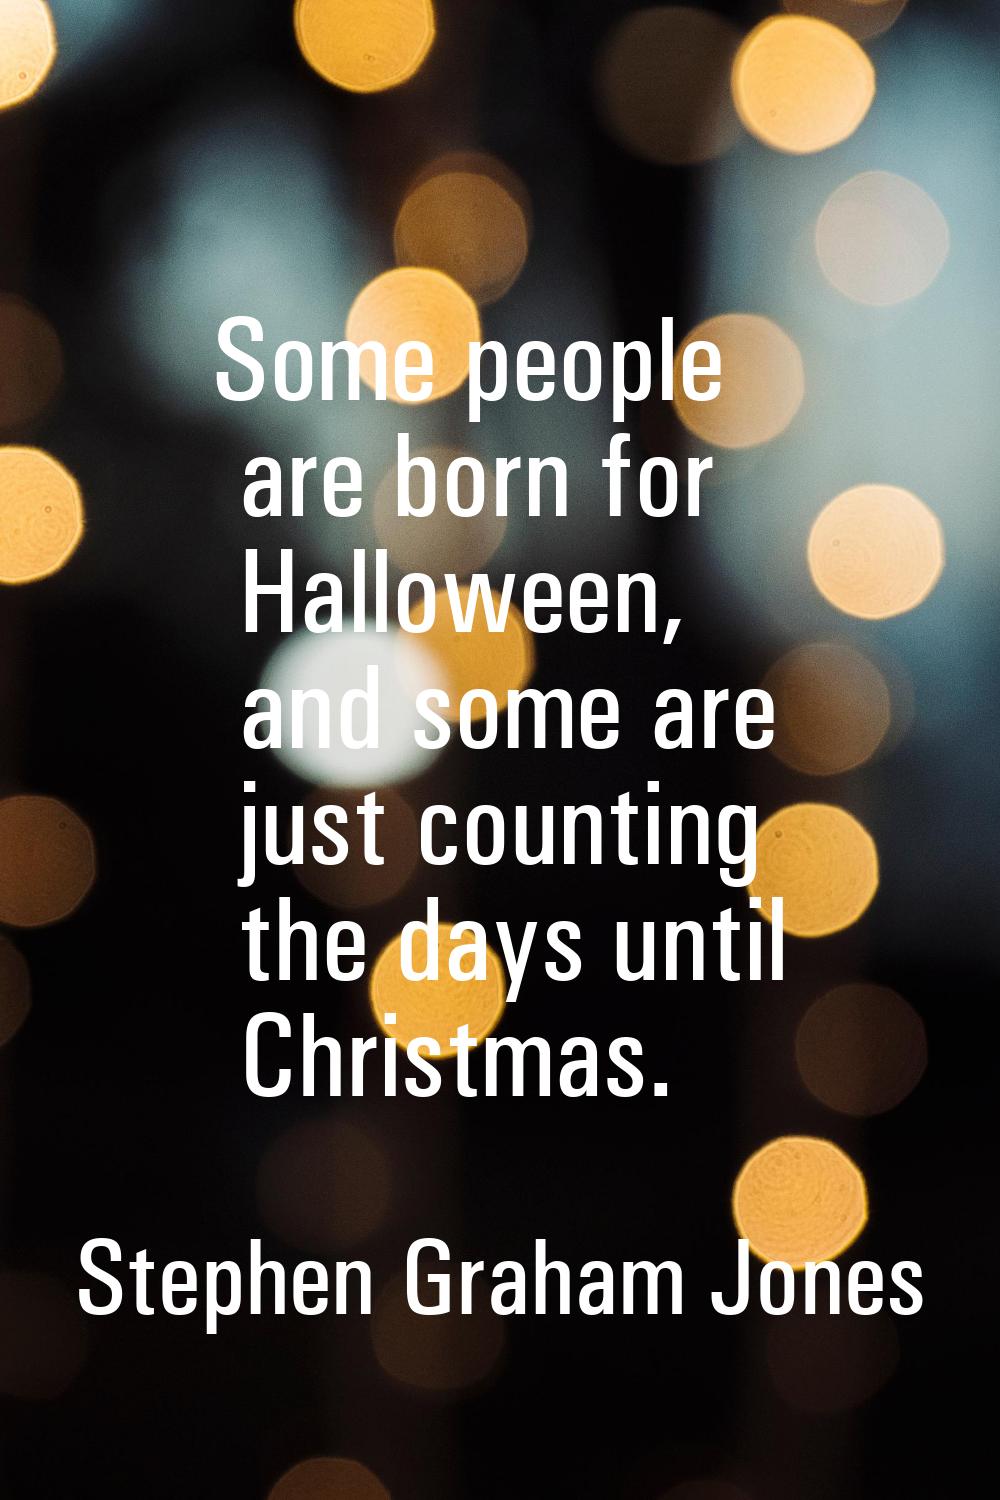 Some people are born for Halloween, and some are just counting the days until Christmas.